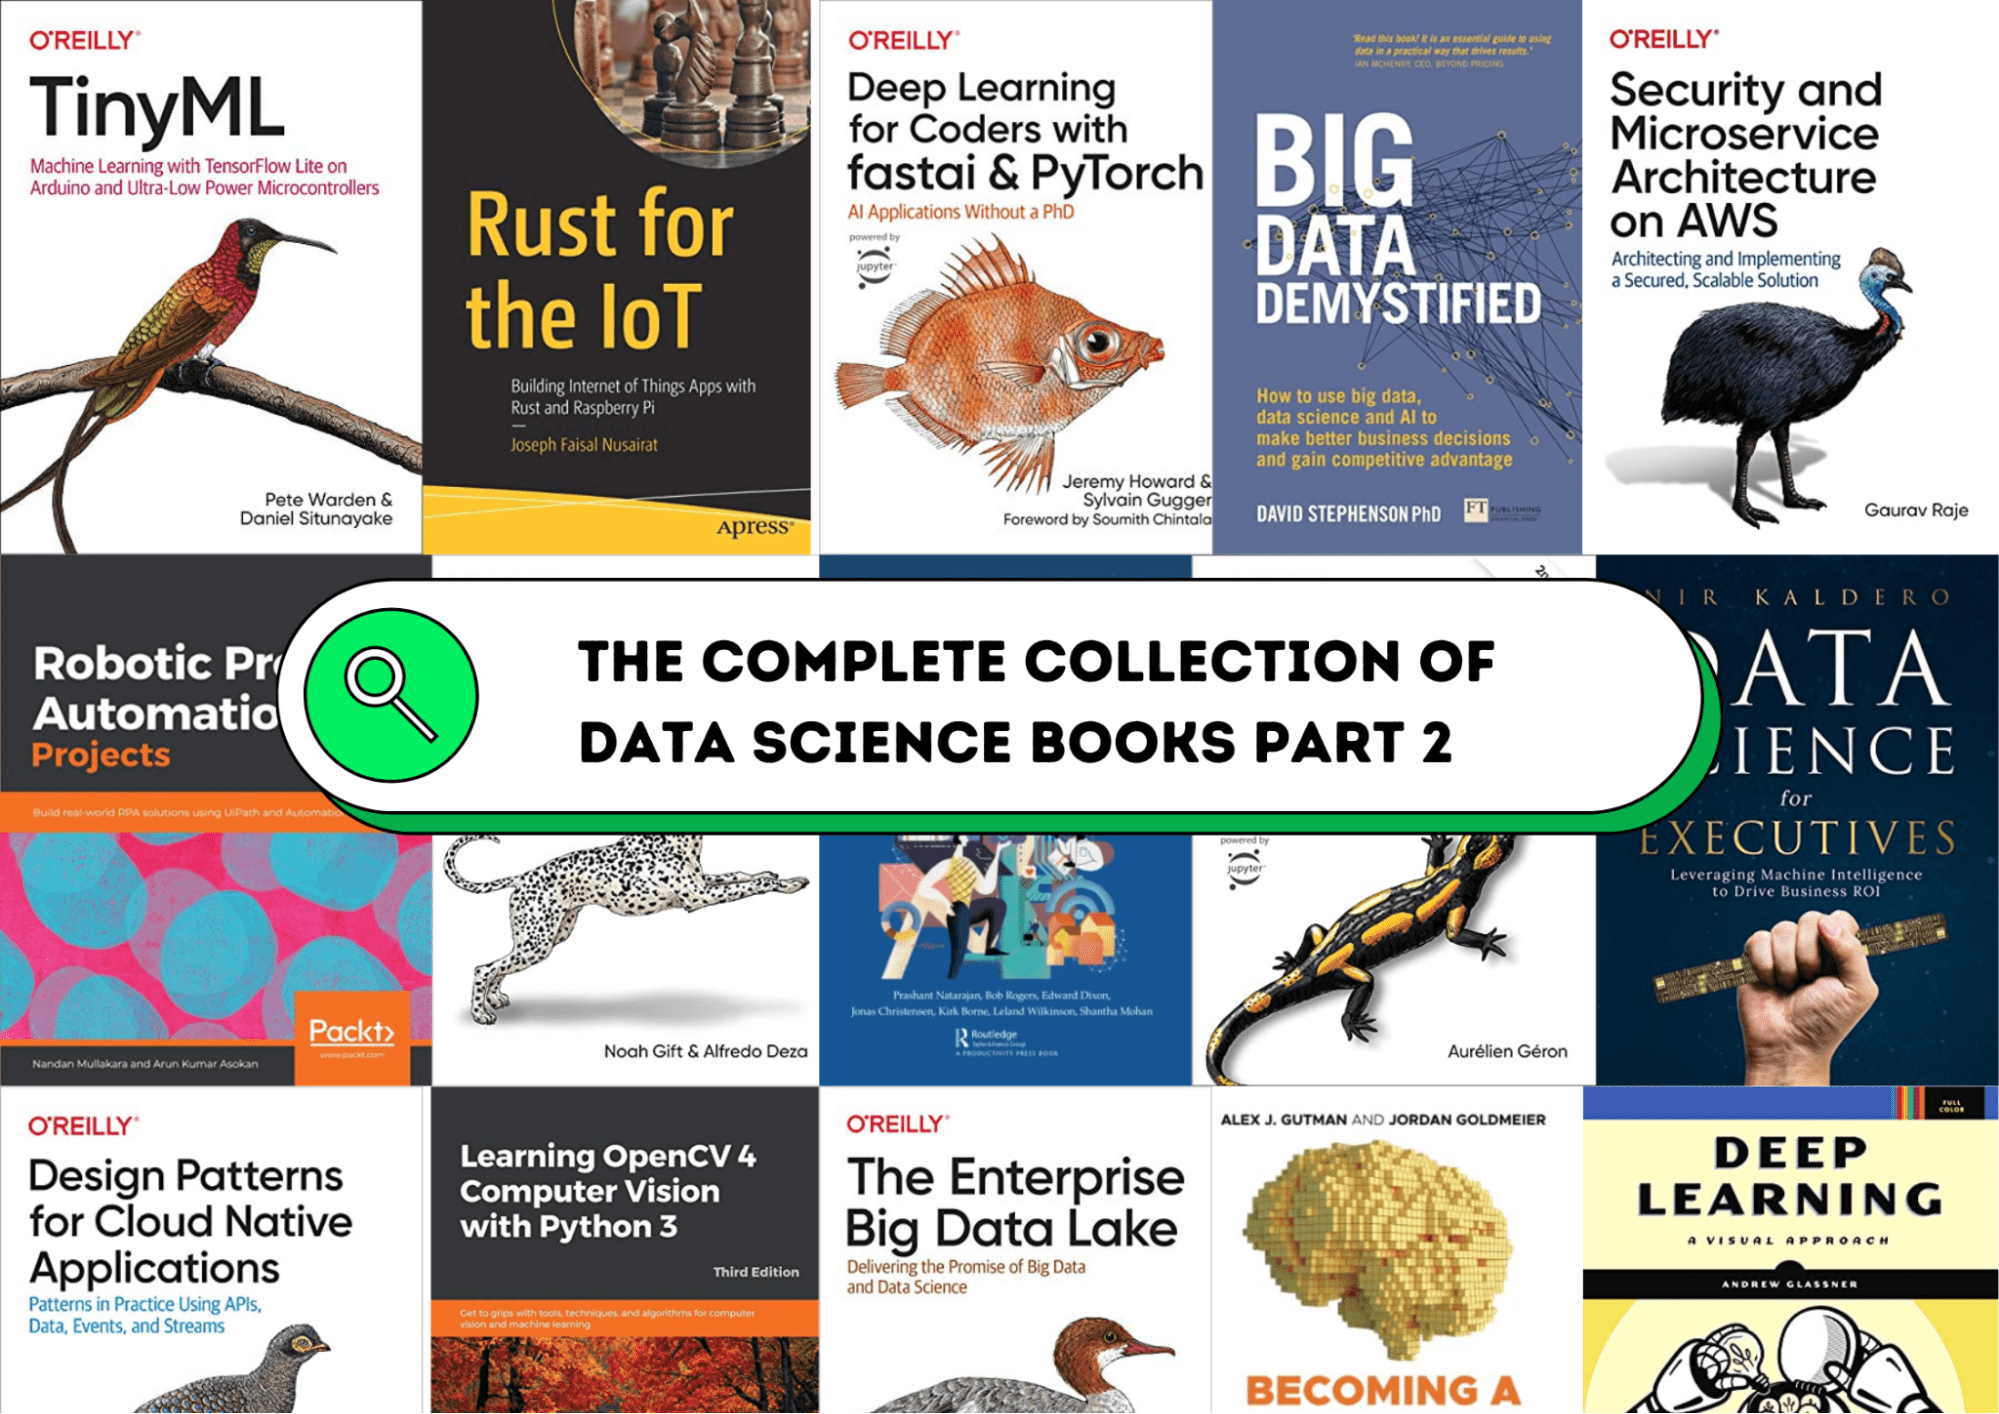 The Complete Collection of Data Science Books – Part 2